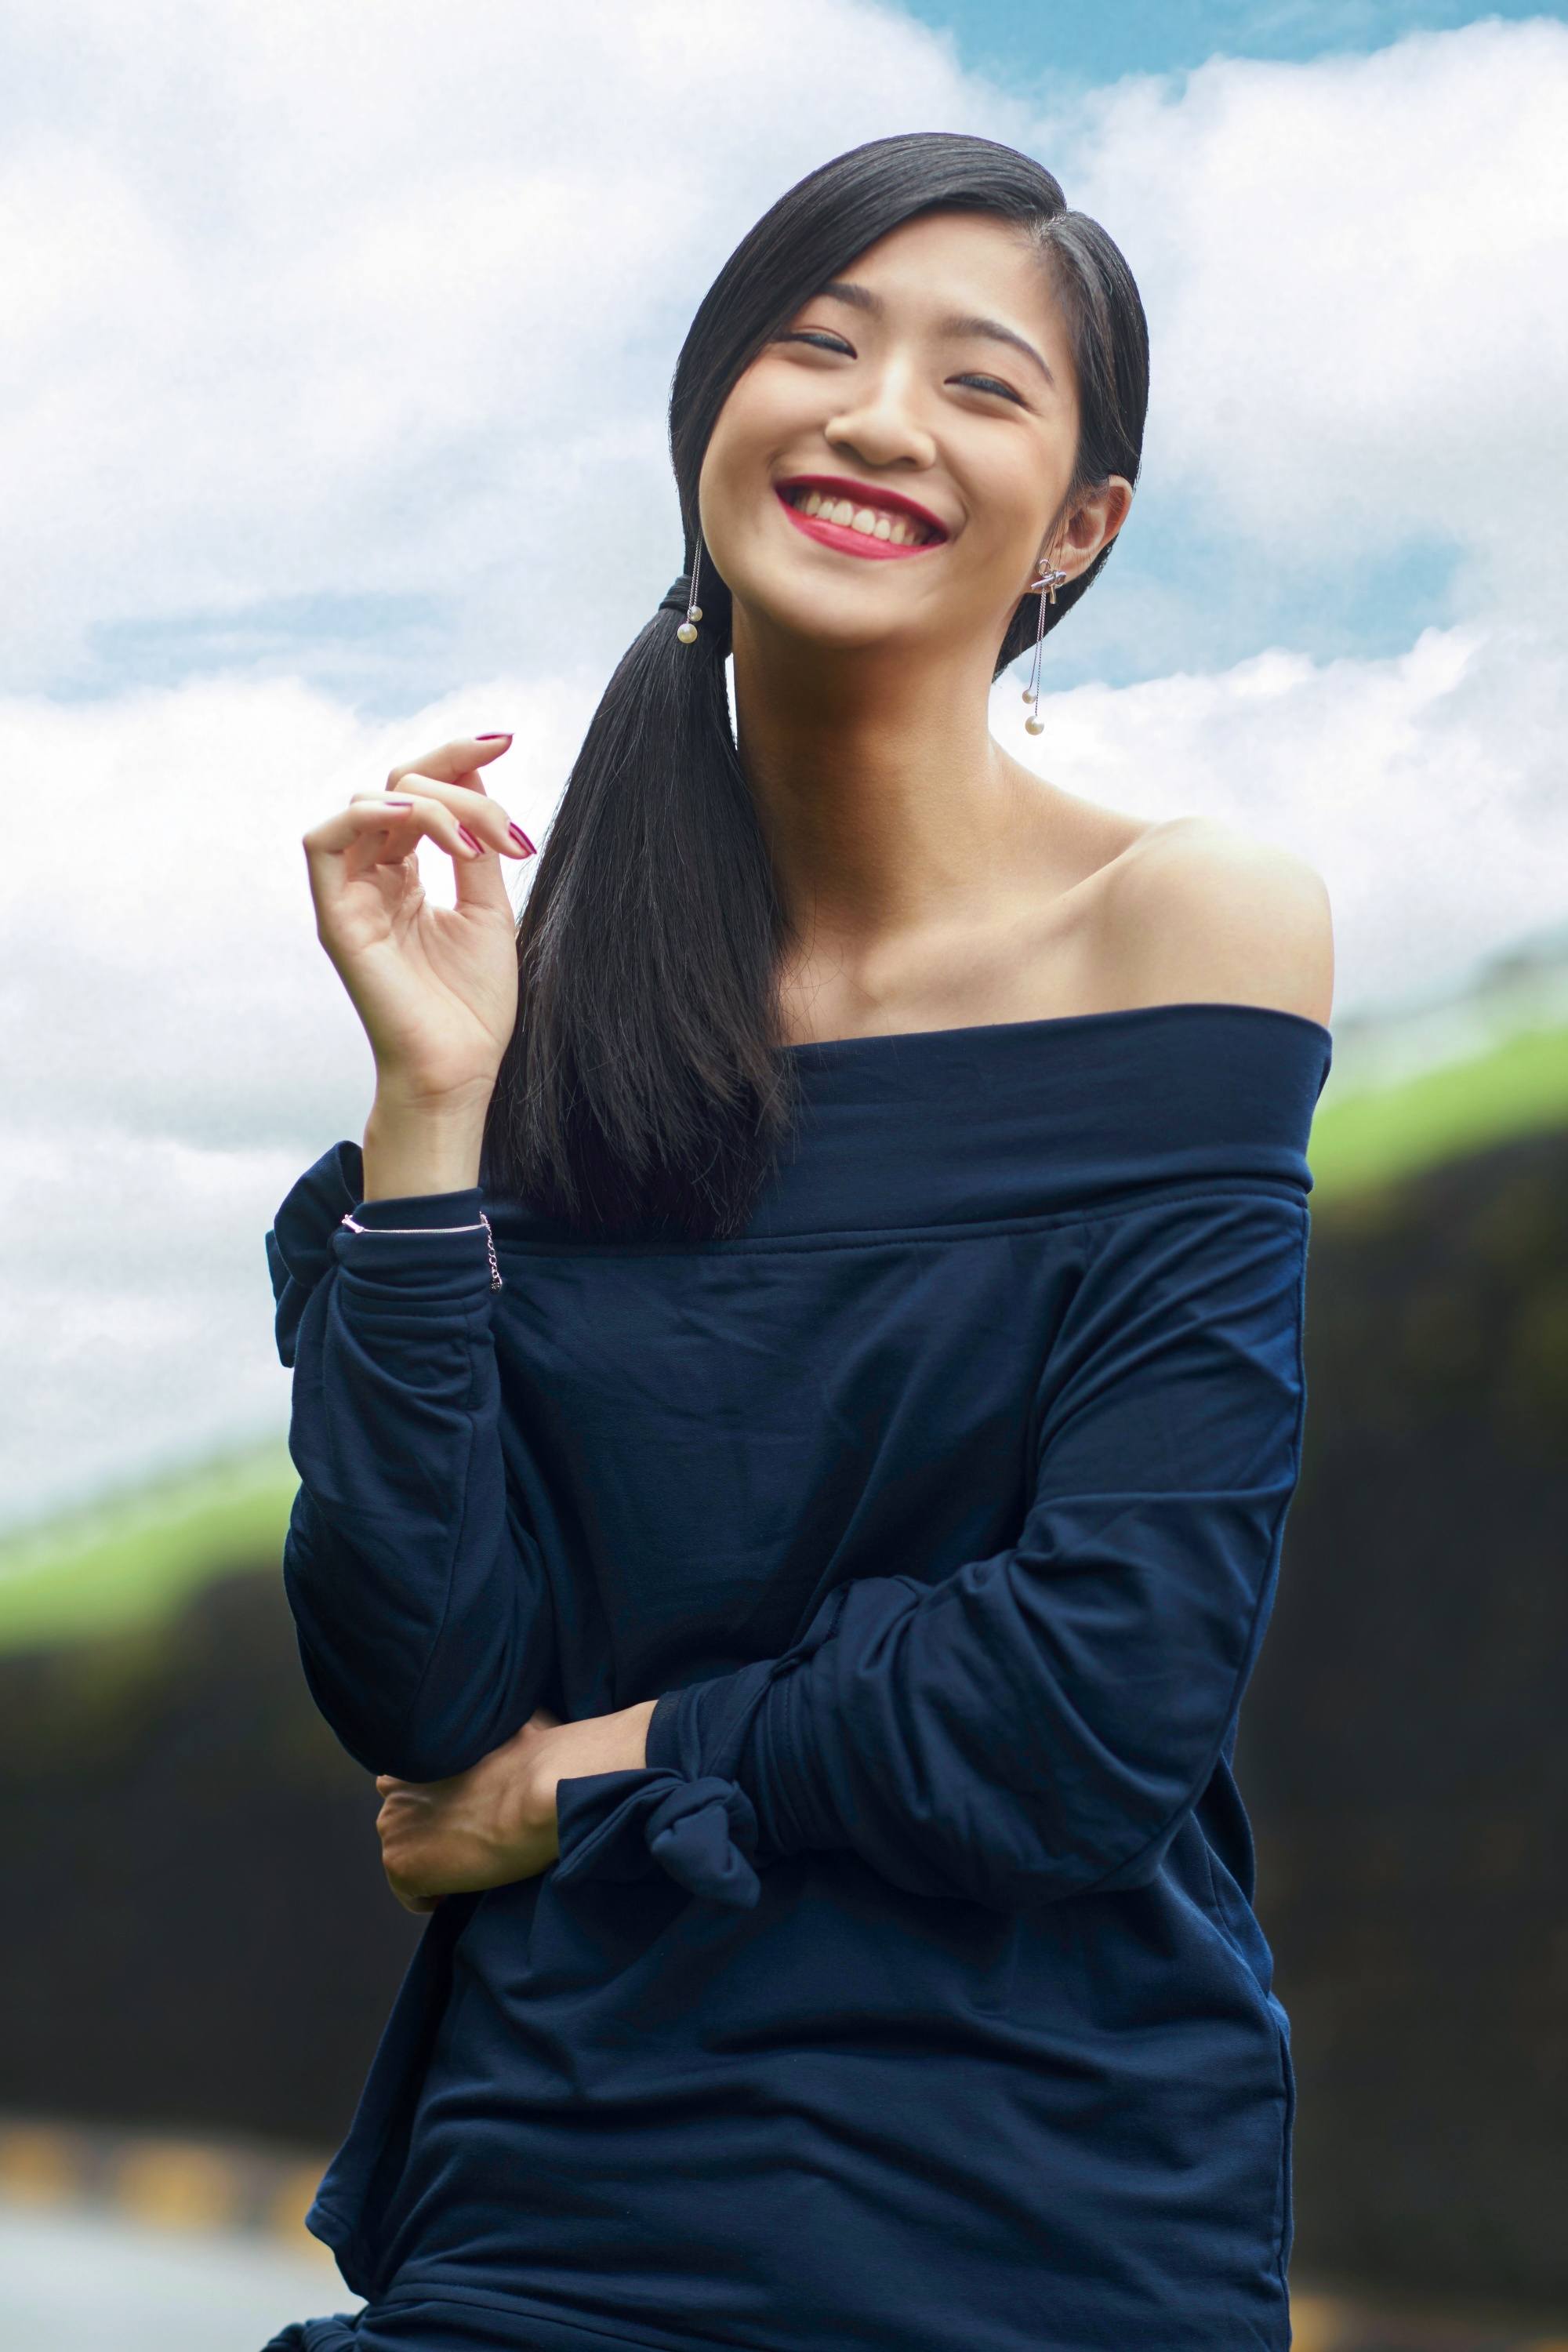 Asian woman with long black hair wearing a dark blue off-shoulder top